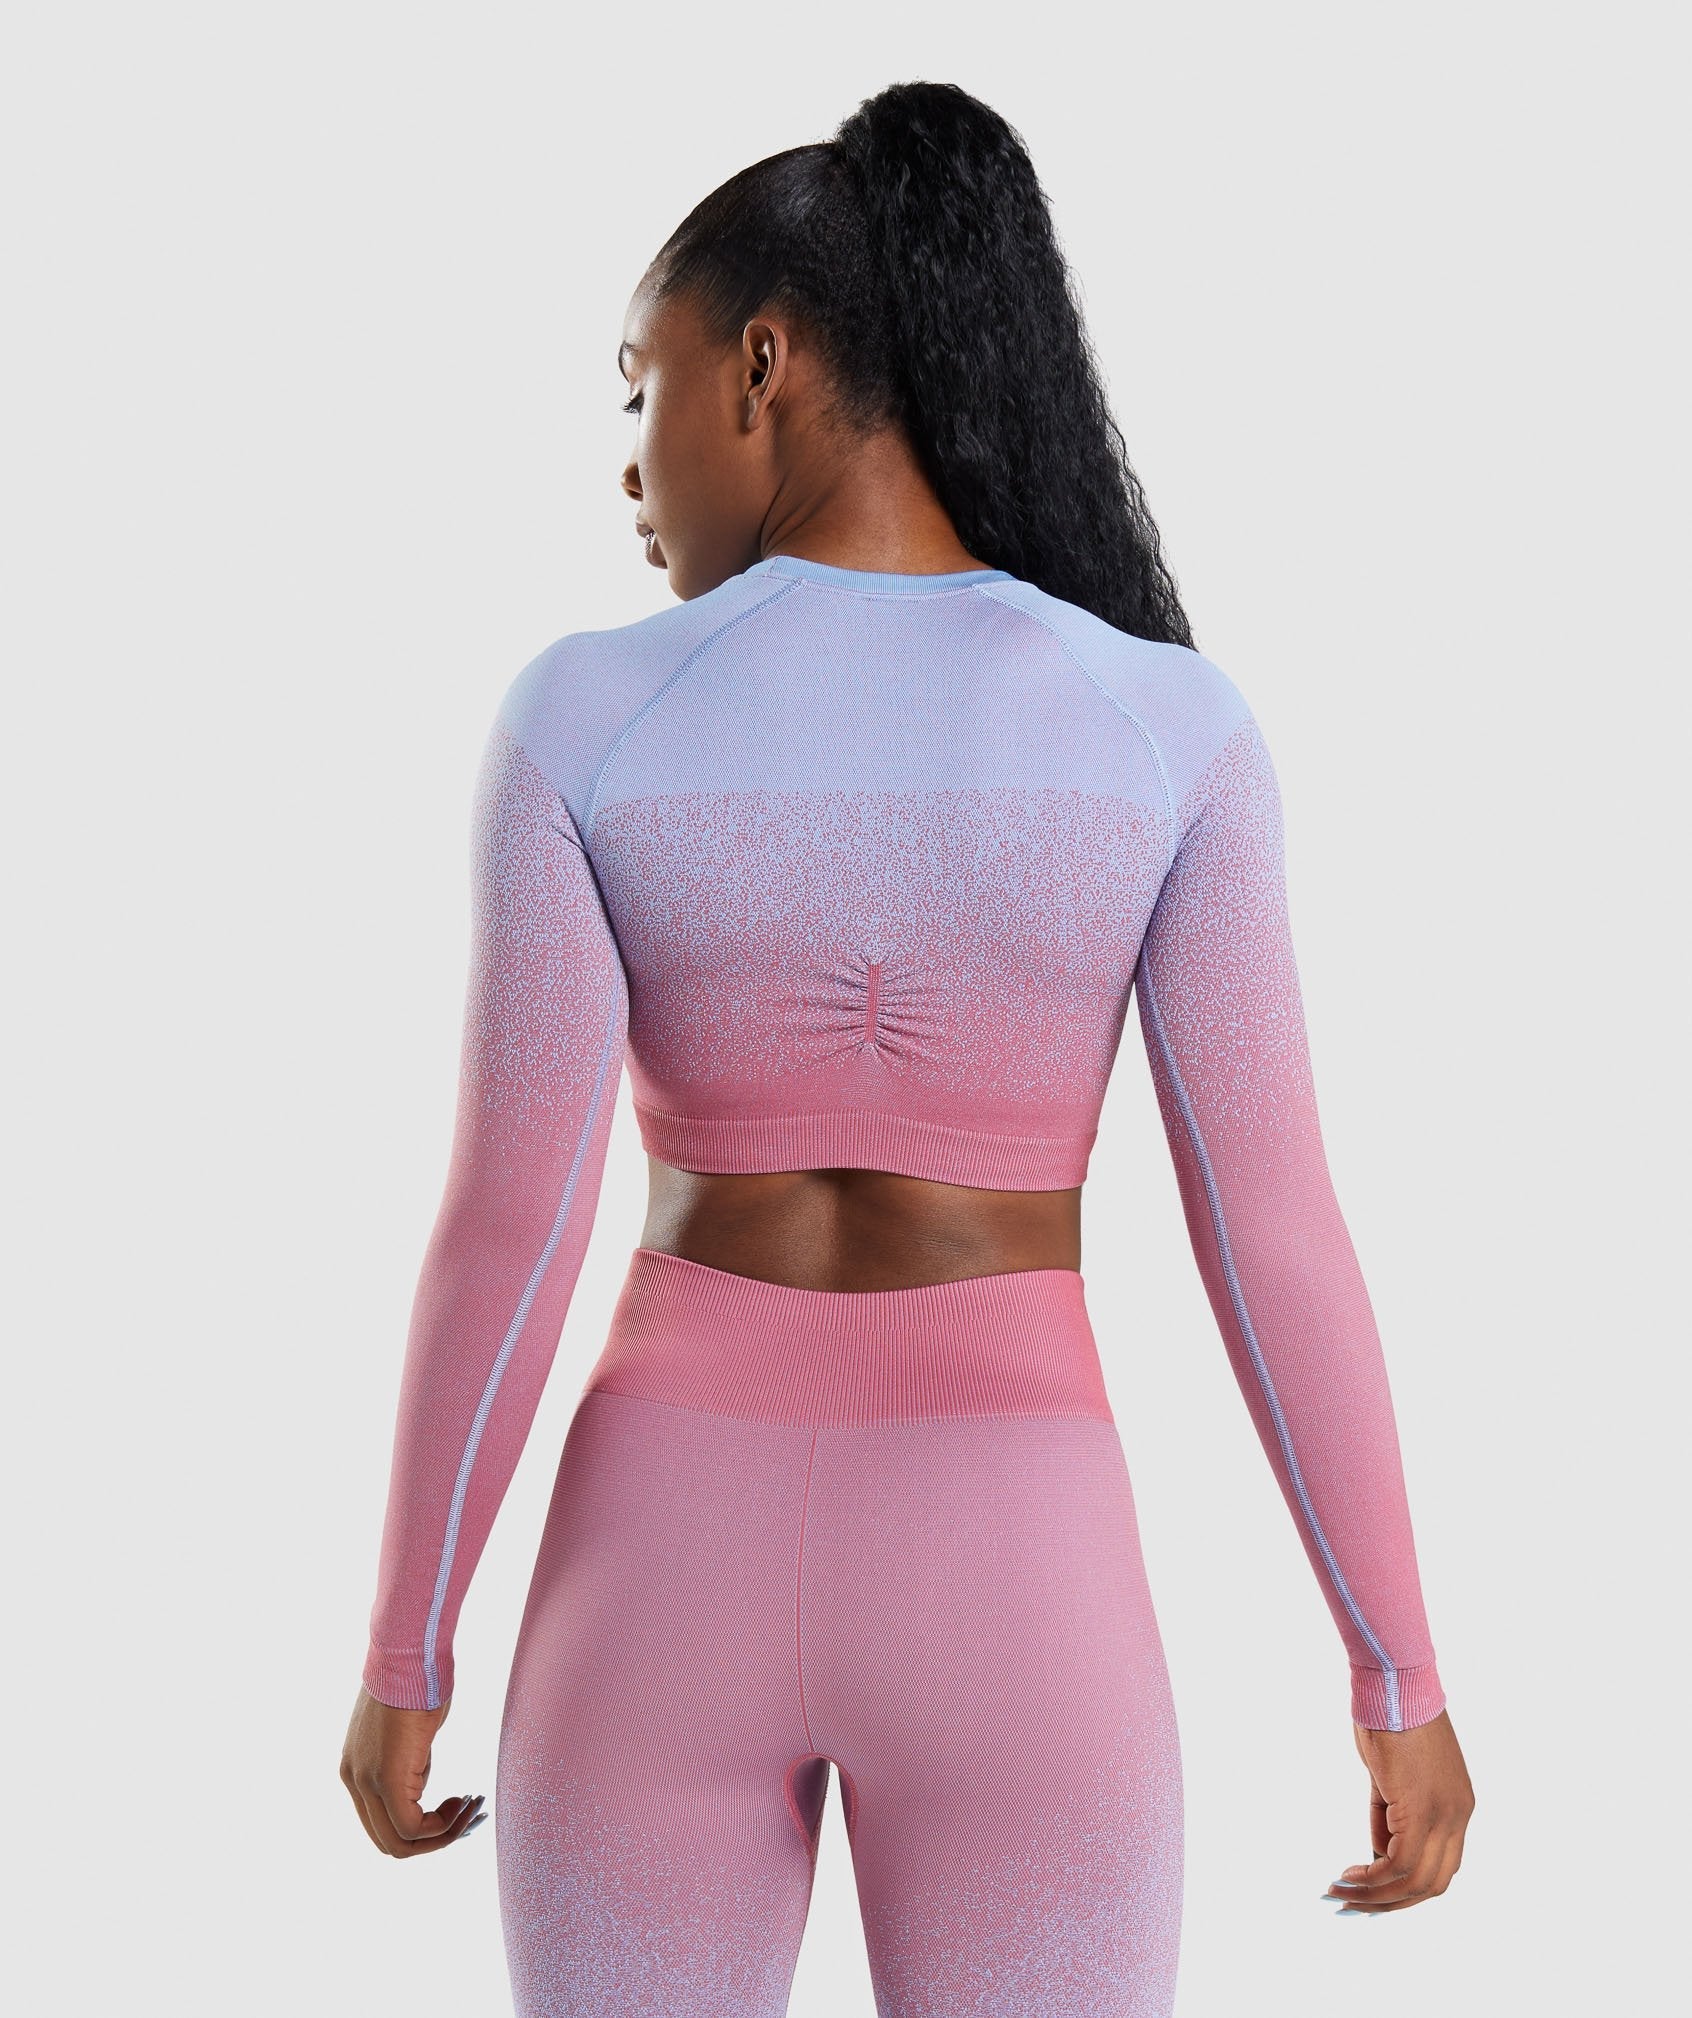 Adapt Ombre Seamless Long Sleeve Crop Top in Rose Pink/Light Blue